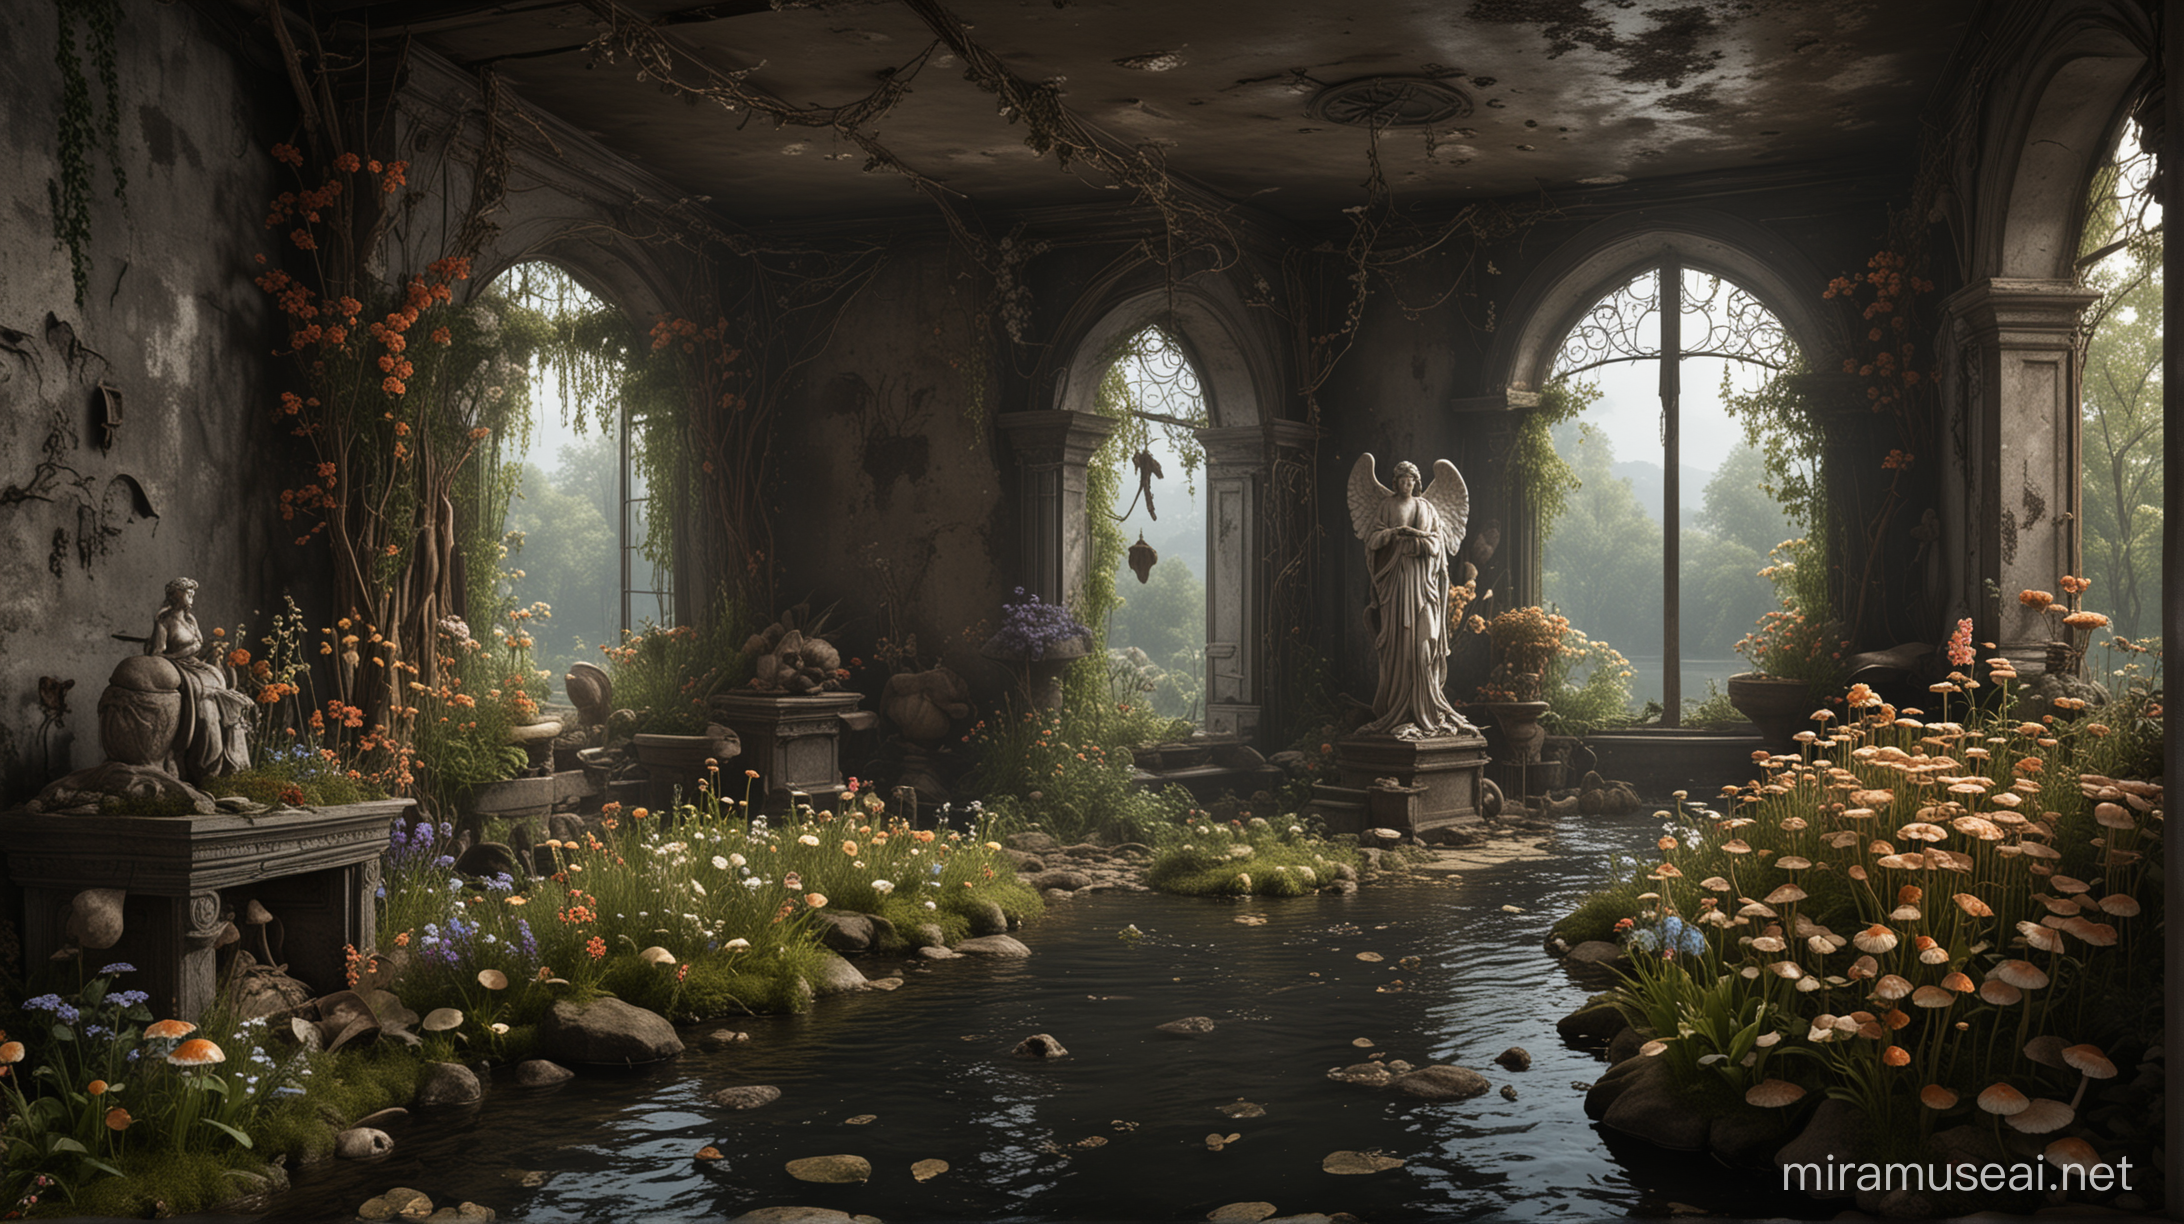 Dark fantasy decay room with angel statue and river with flowers and mushrooms